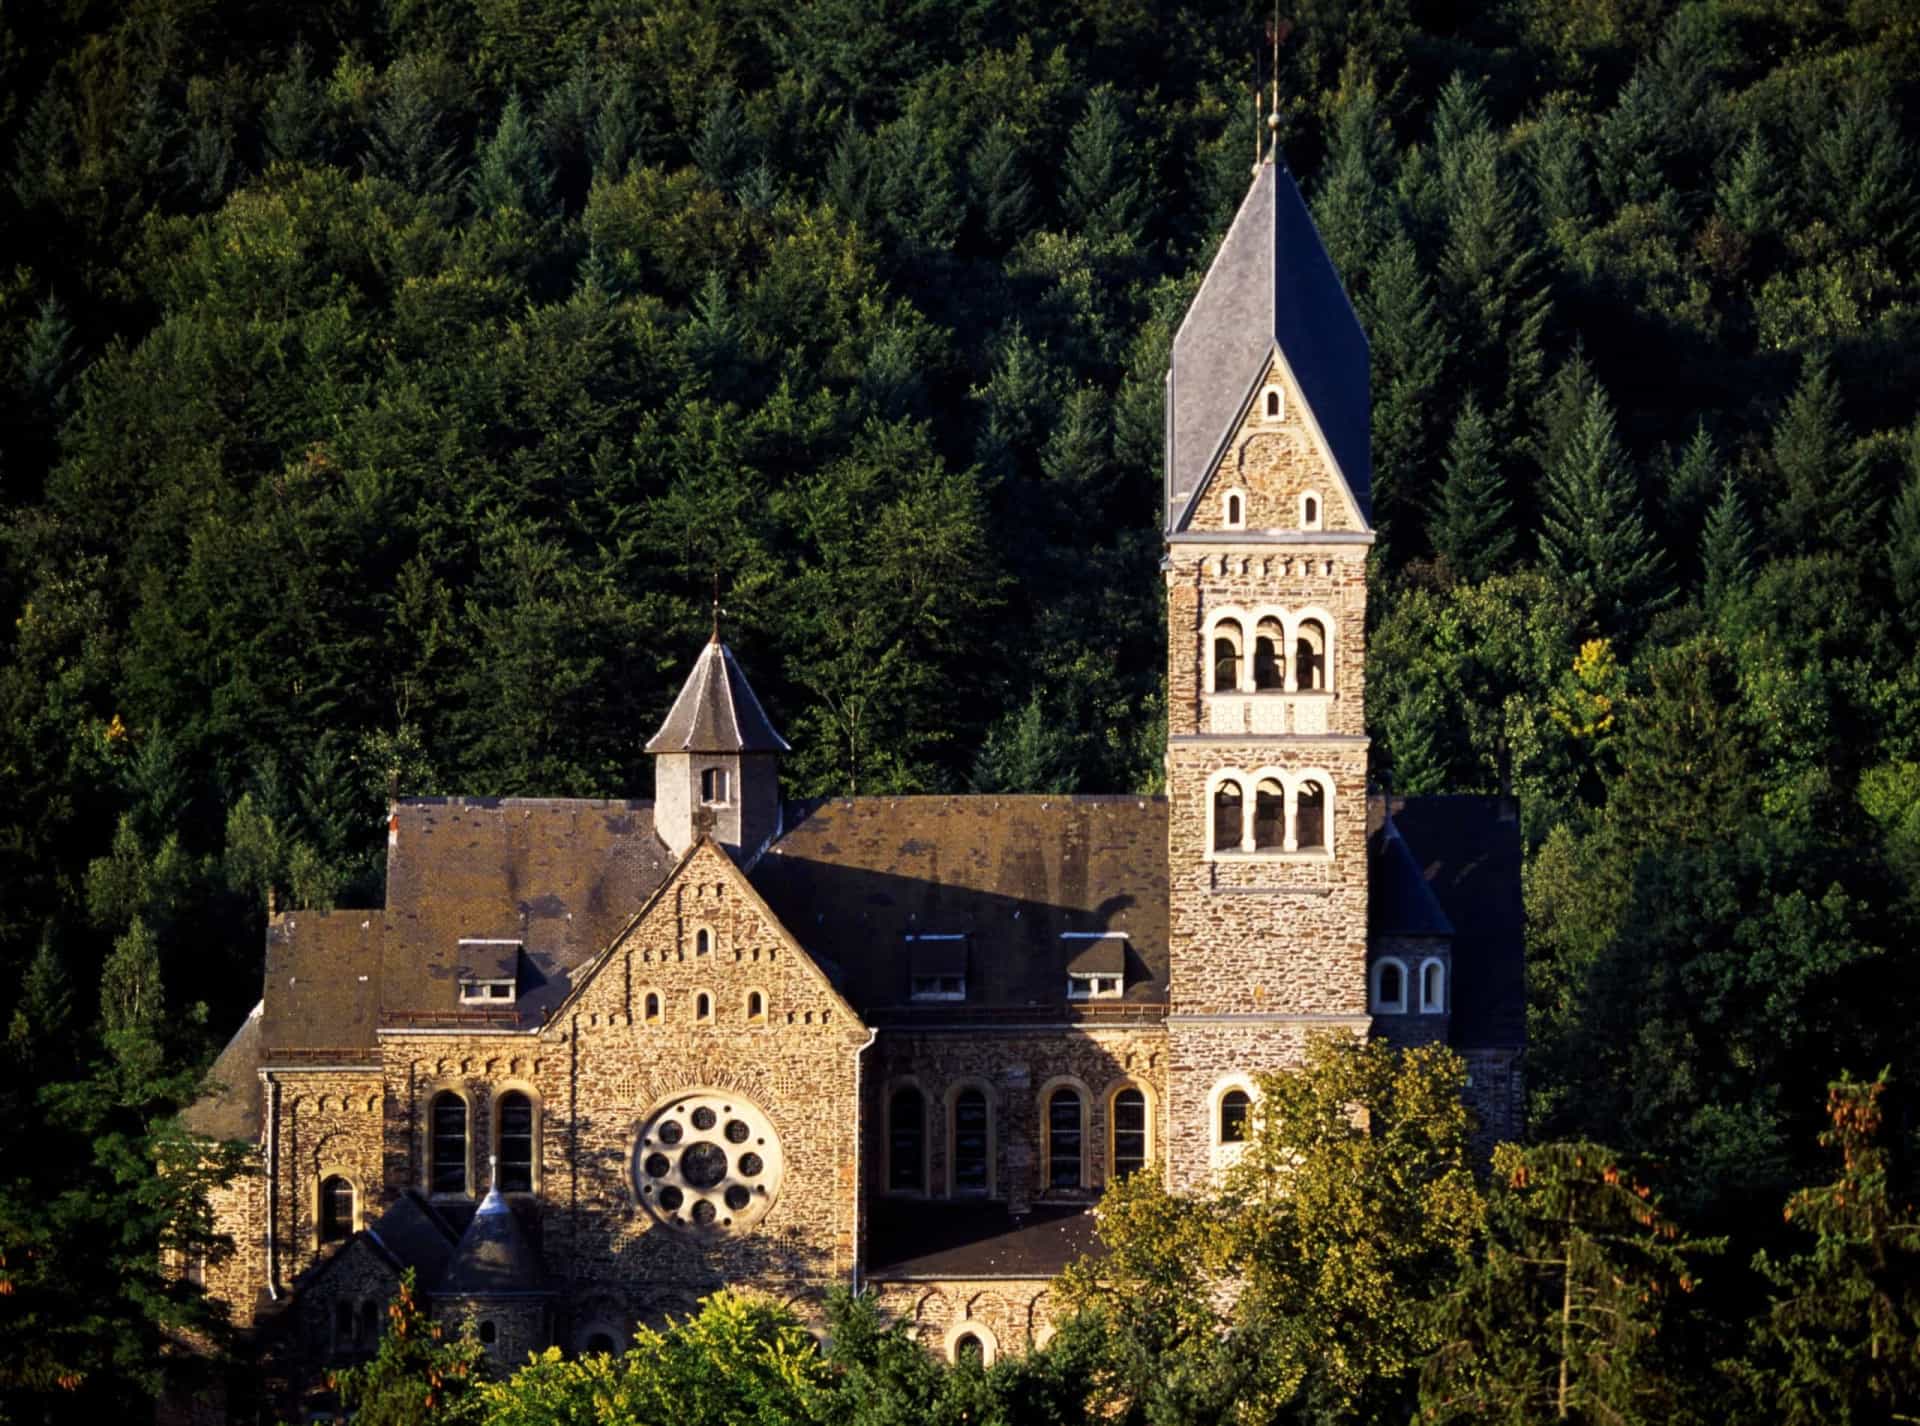 <p>Competing with Wiltz for stunning visual appeal is Clervaux. The town is also associated with the Battle of the Bulge, more specifically the December 1944 Battle of Clervaux, which ended in disaster for American forces after they were encircled by numerically superior German troops. A survivor of the brutal engagement is the Benedictine Abbey of St. Maurice and St. Maur (also known as Clervaux Abbey), built in 1910 and a cherished regional landmark.</p>